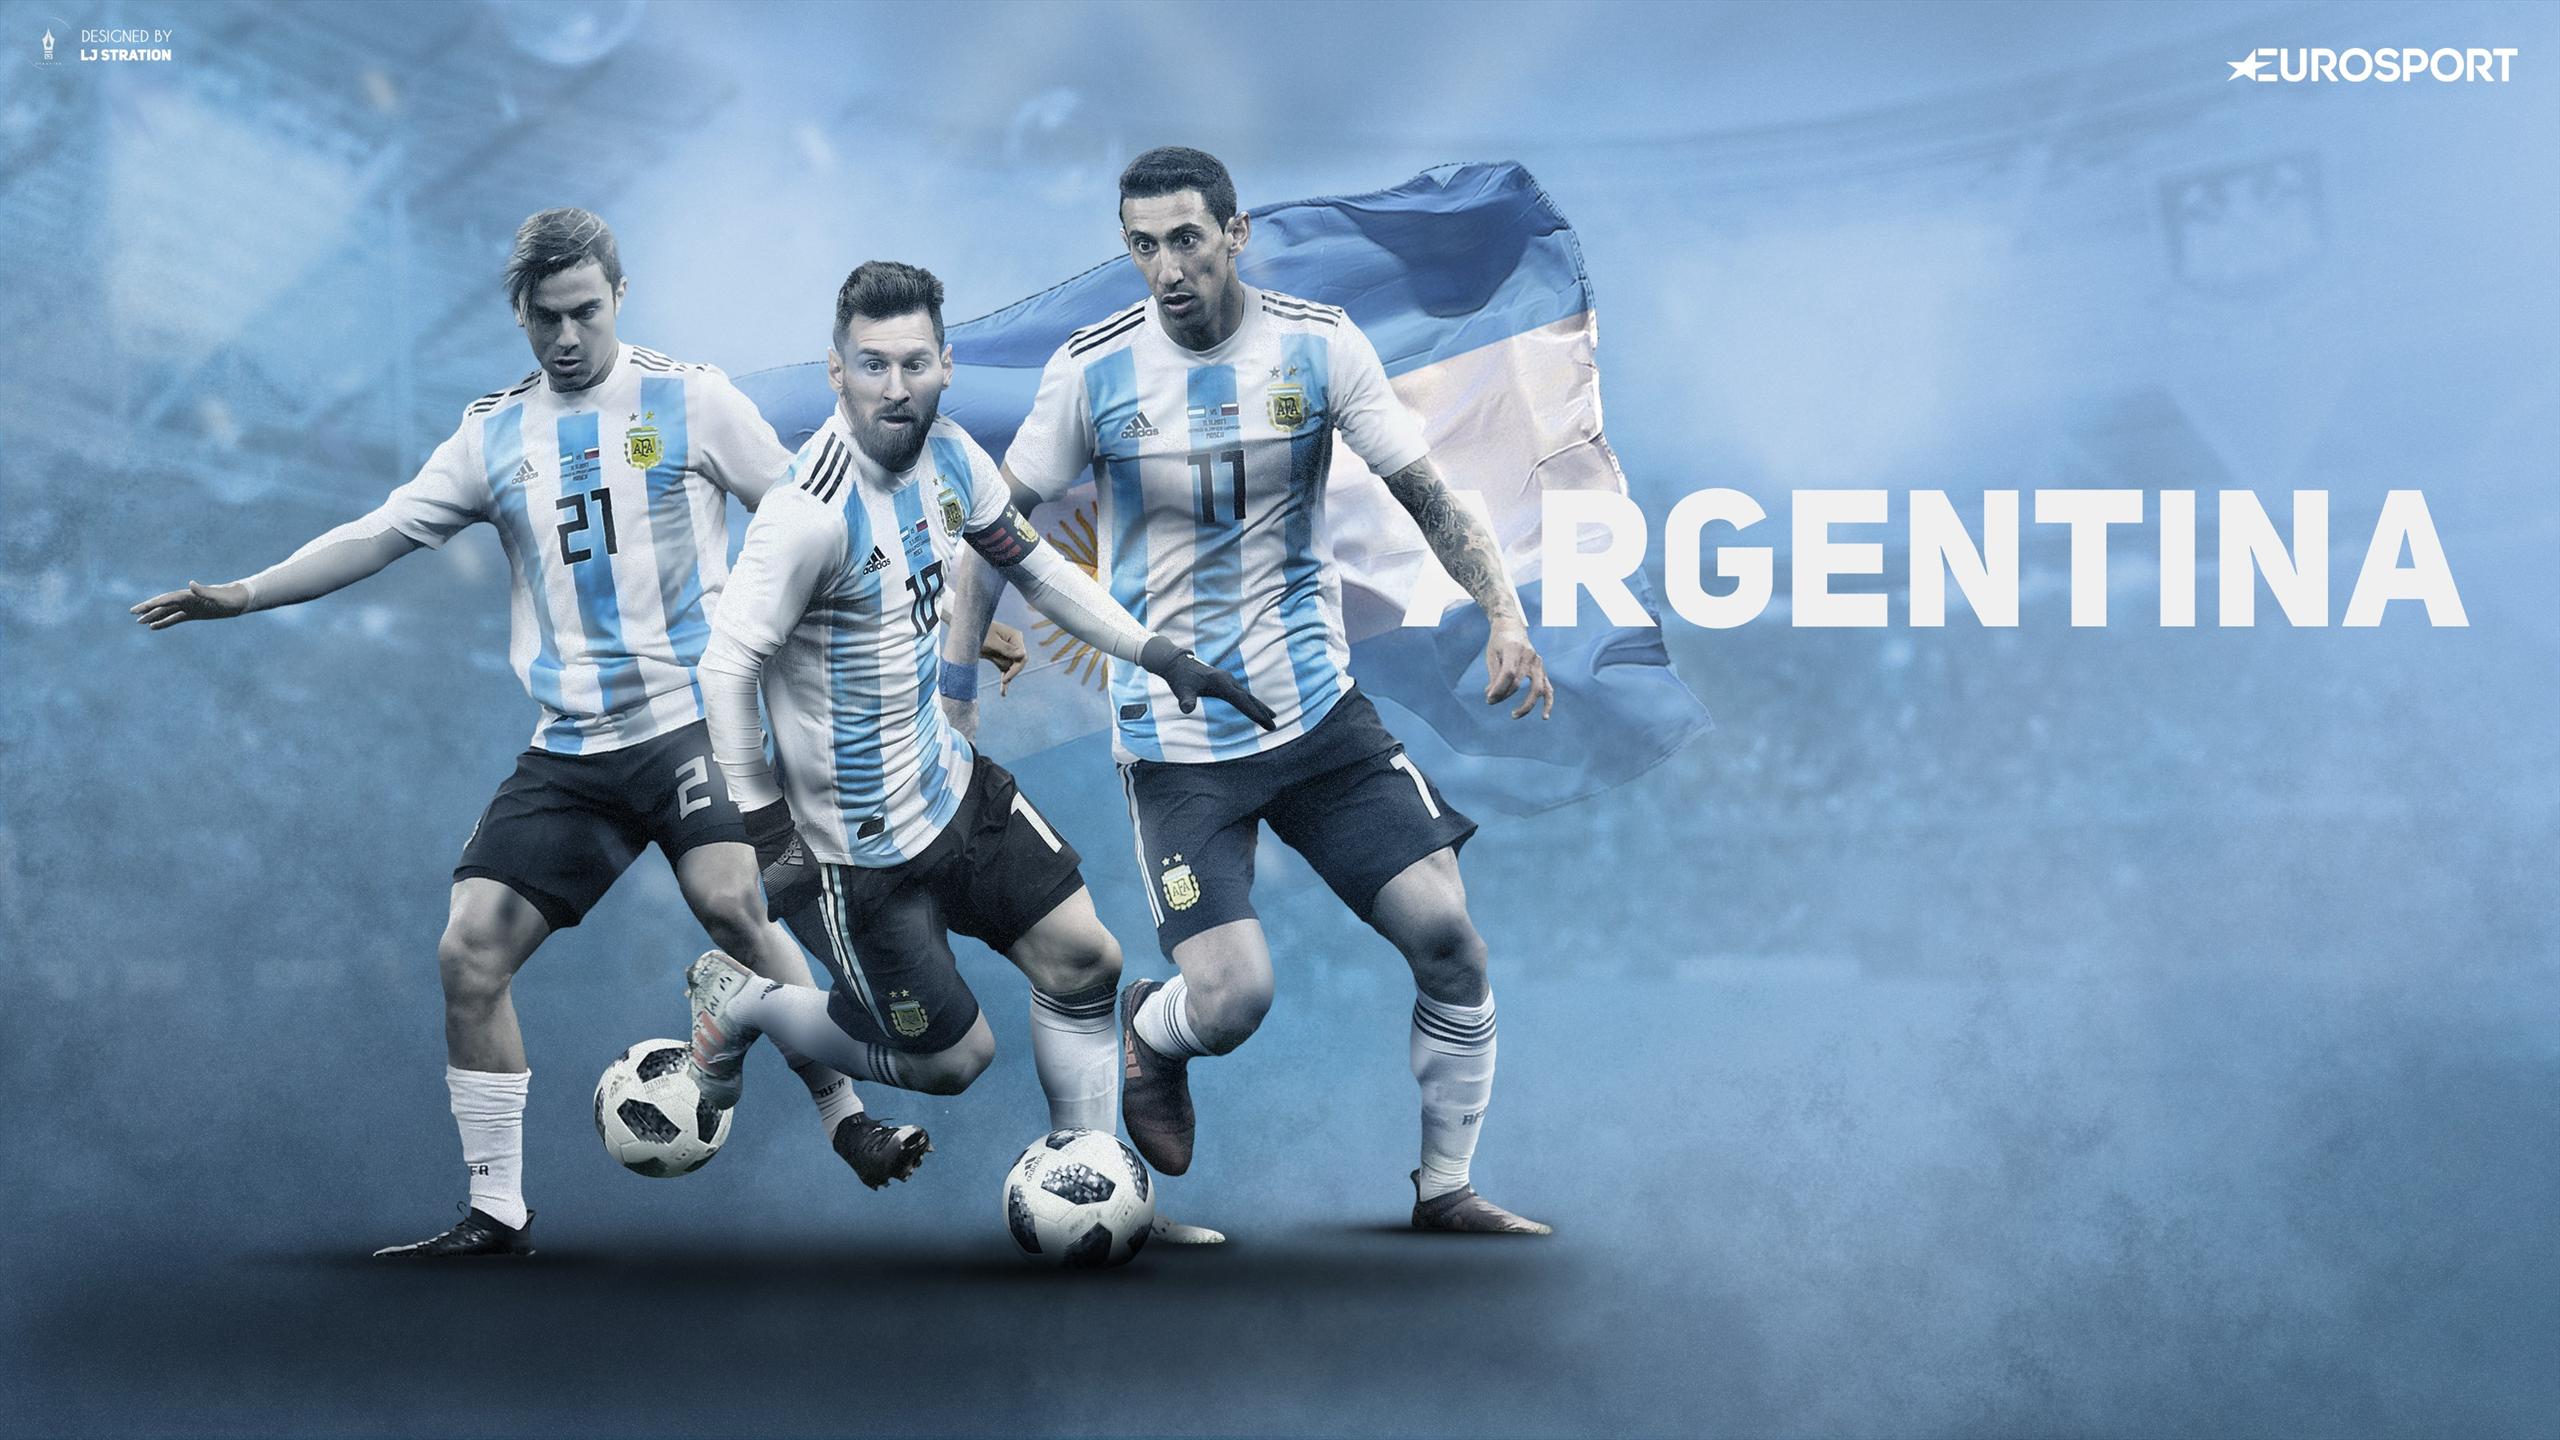 World Cup 2018 Argentina team profile: How they qualified, star man, World Cup record, fixtures